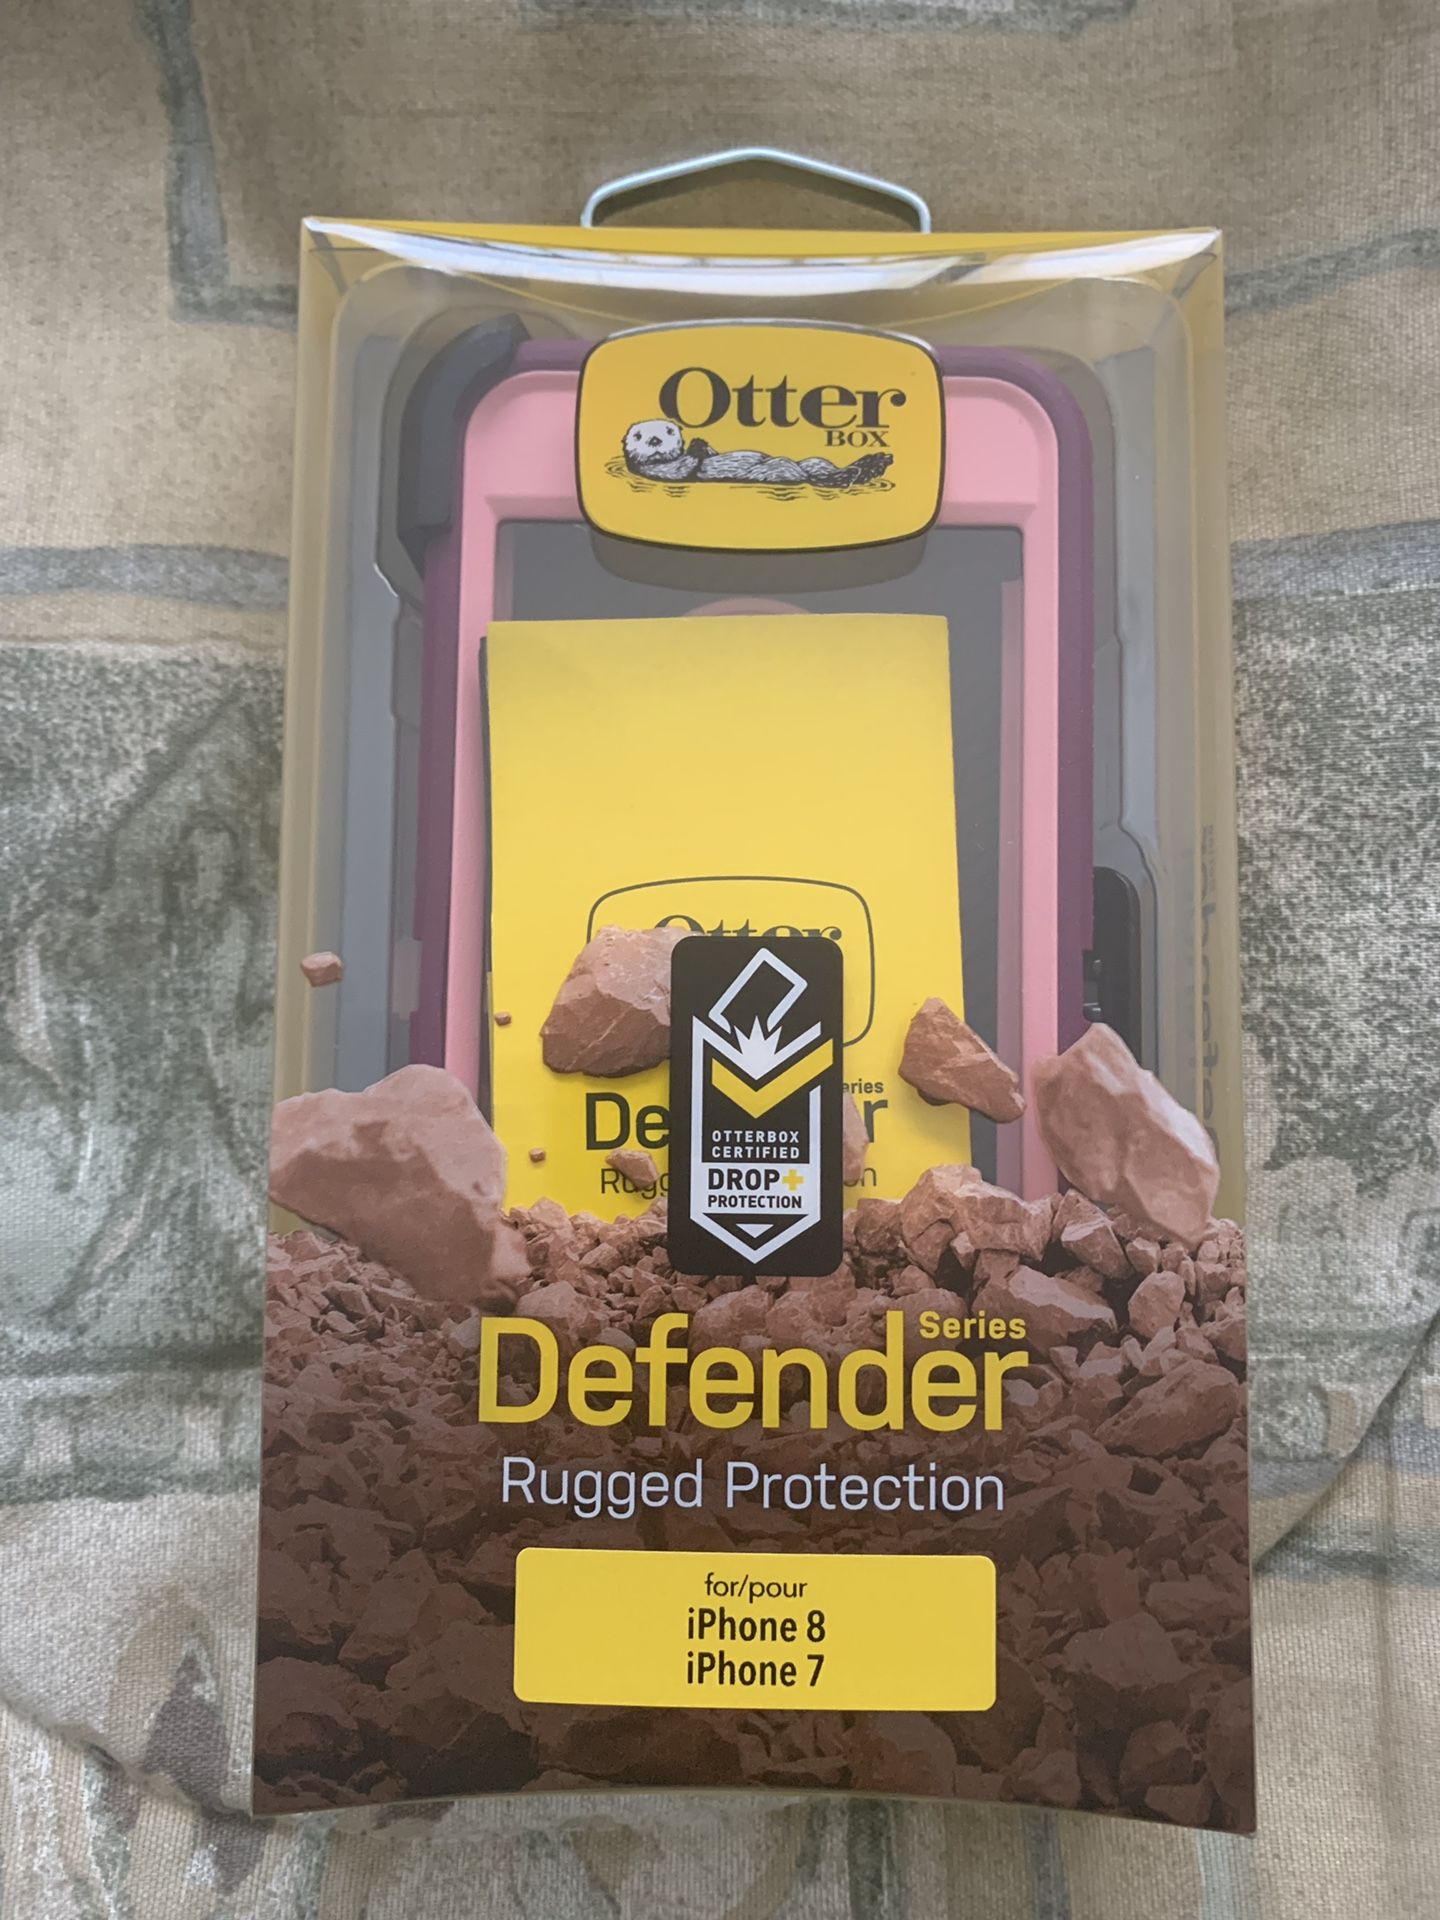 New Otter Box Defender case for iPhone 8 or 7